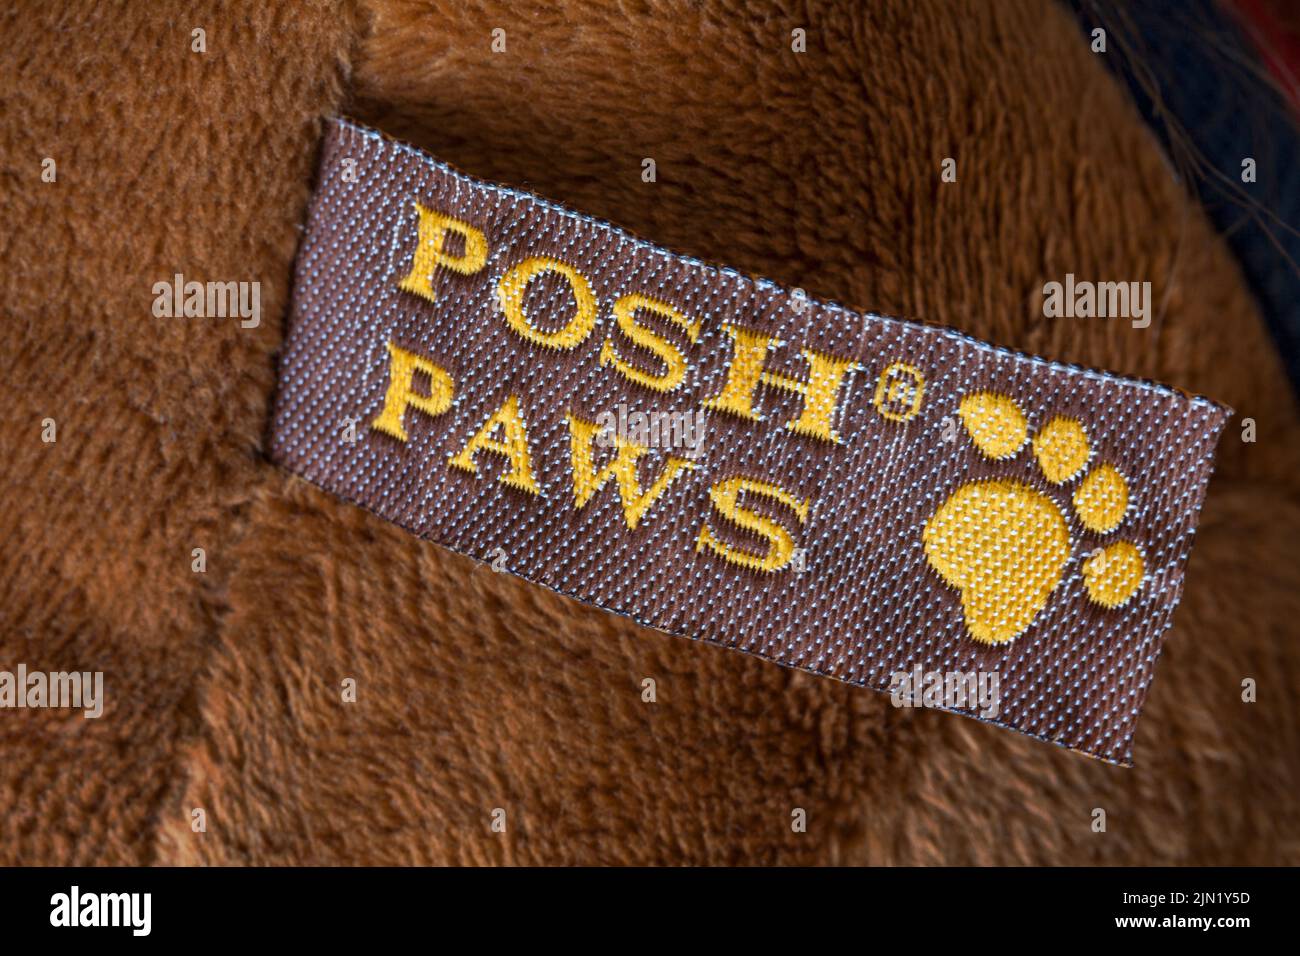 Posh Paws label on soft cuddly toy Stock Photo